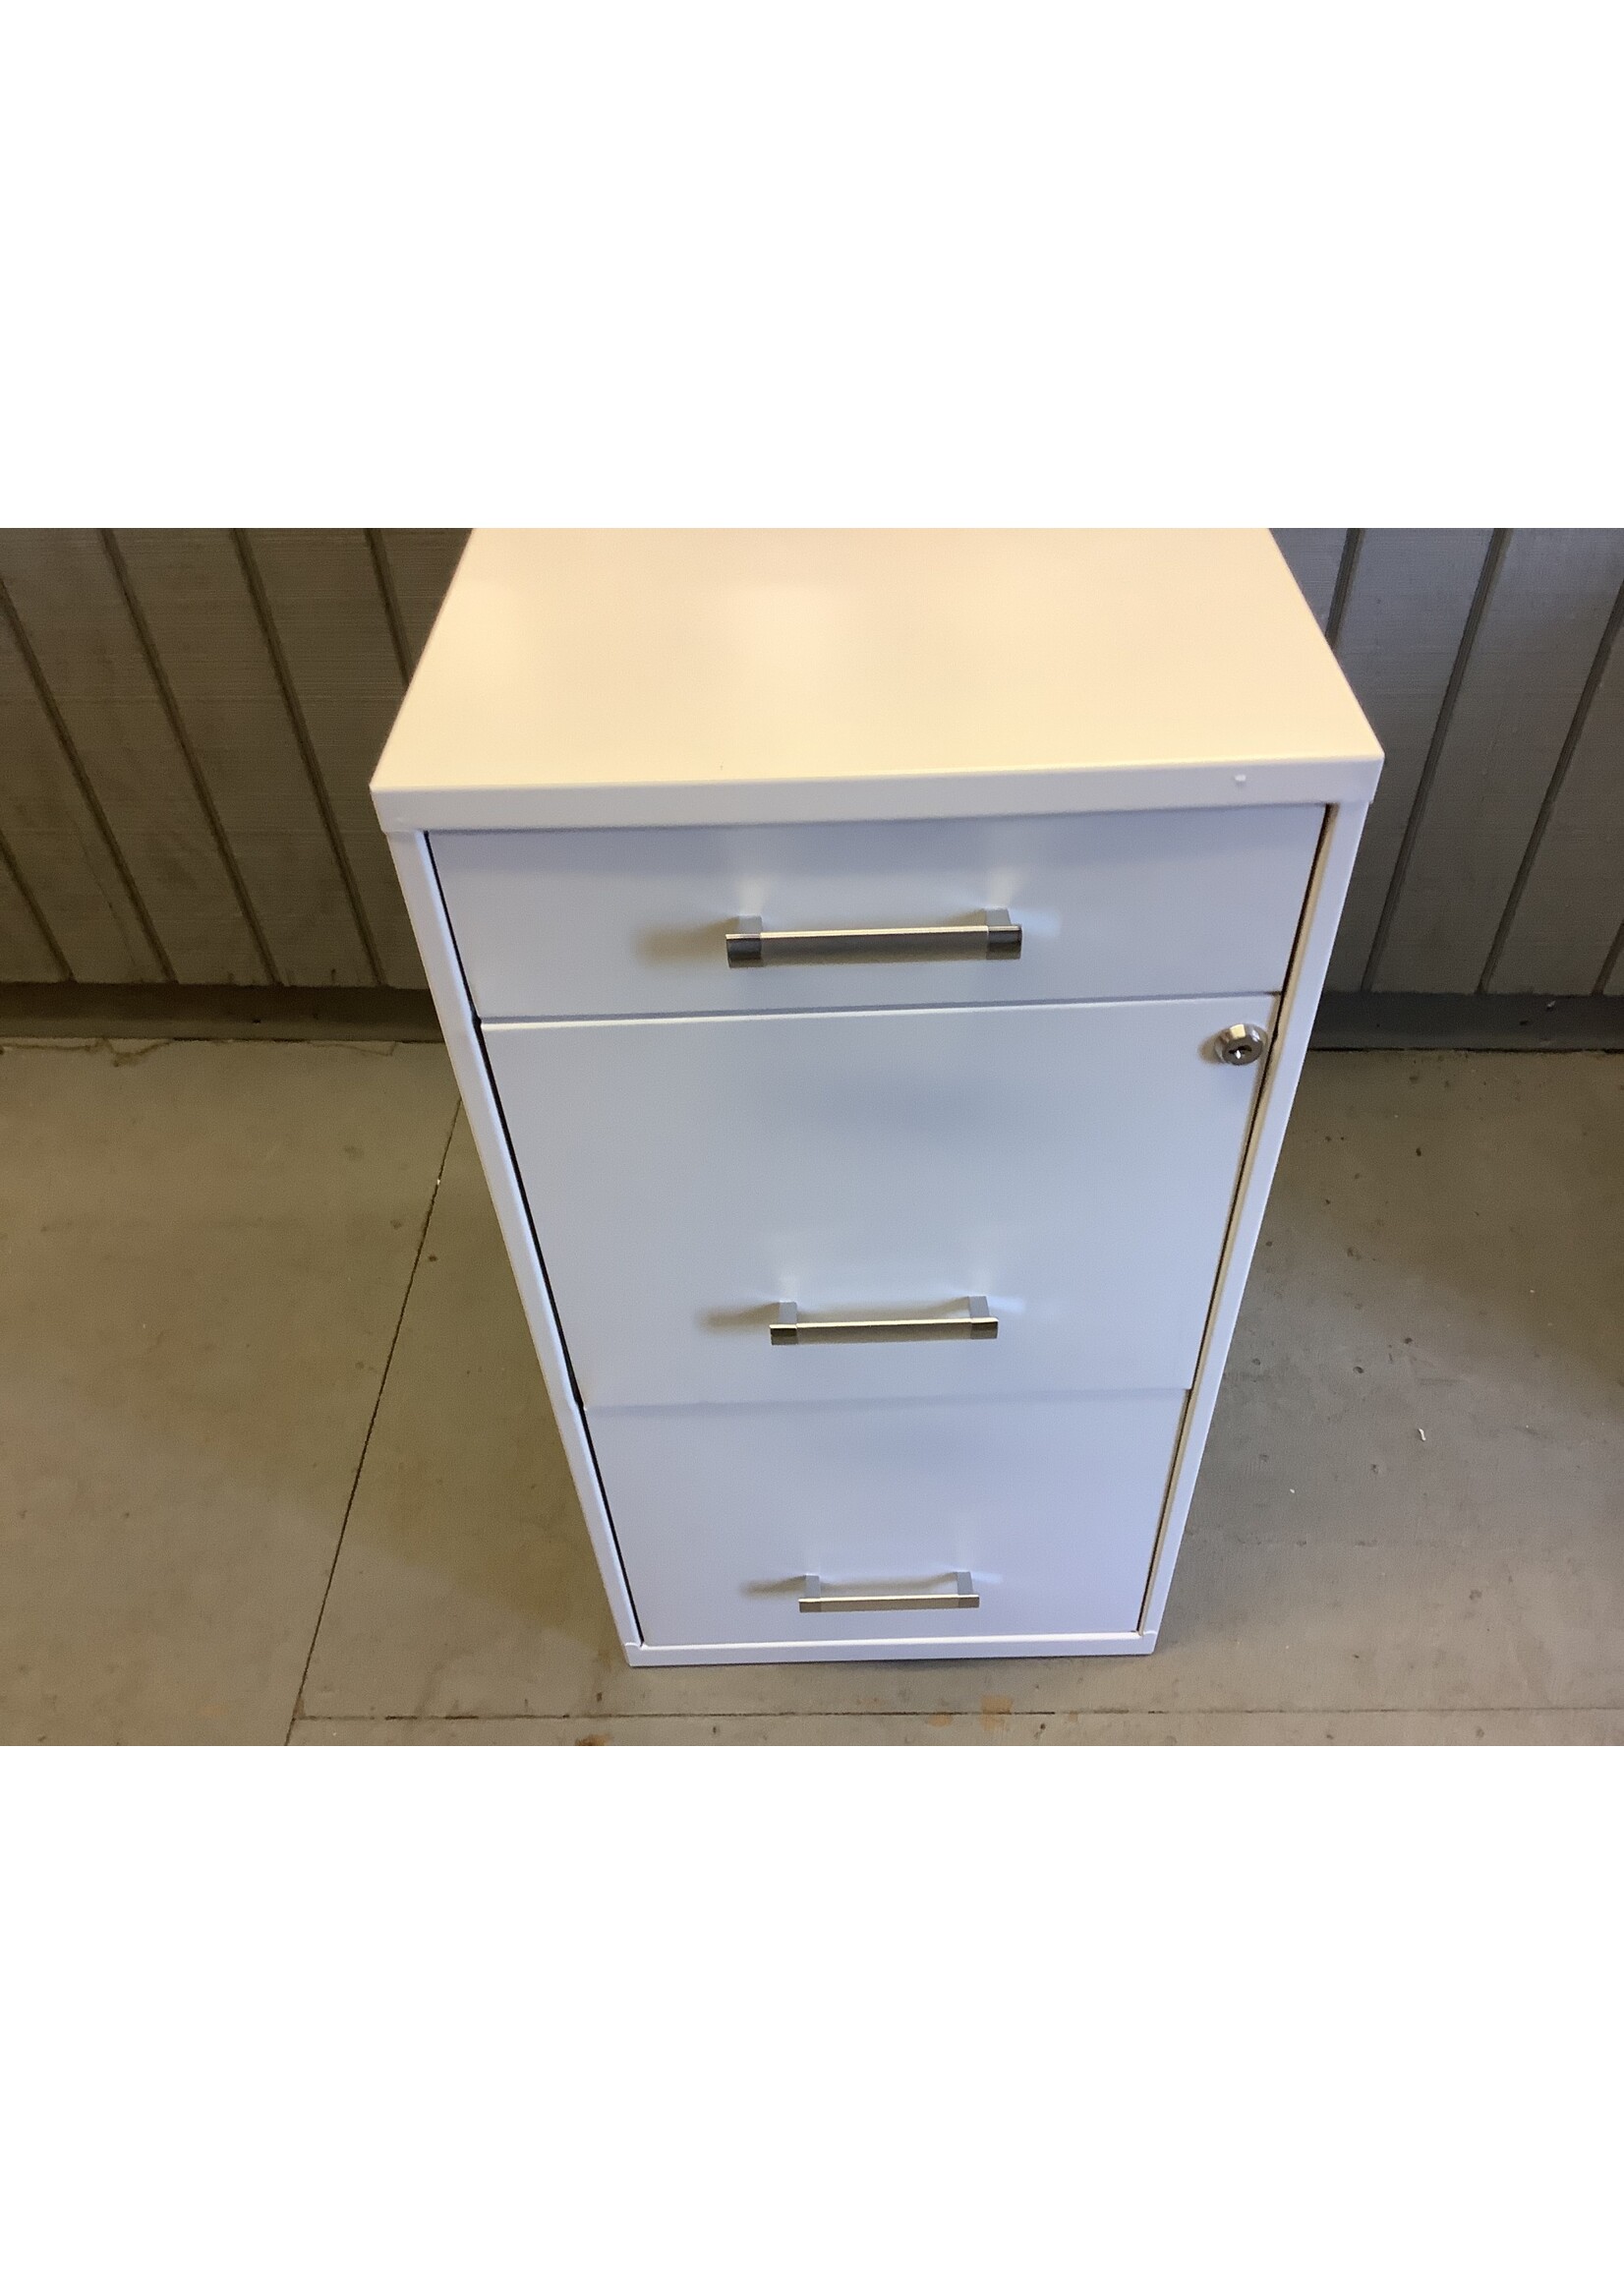 *No Keys* Small scratch & sm dent* Space Solutions 3-Drawer Steel Filing Cabinet